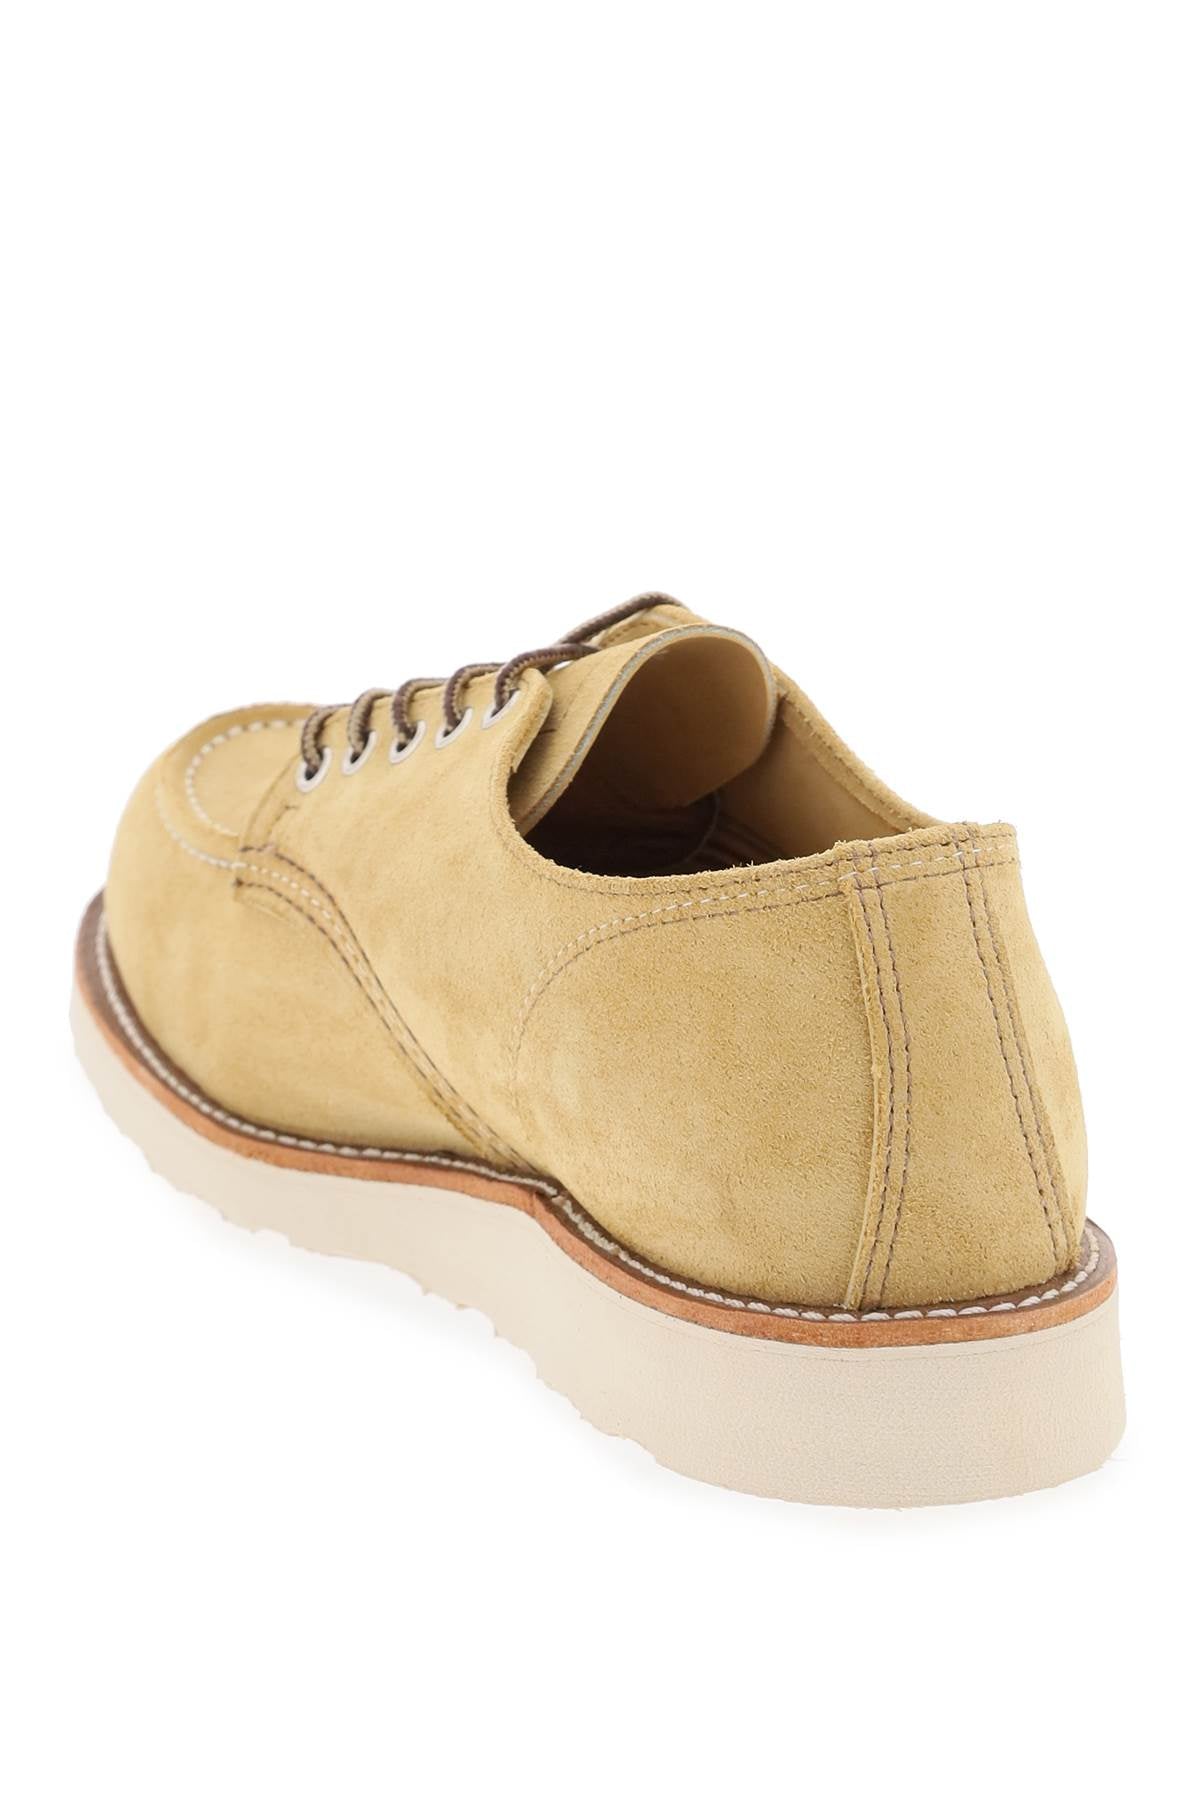 Red wing shoes laced moc toe oxford-2